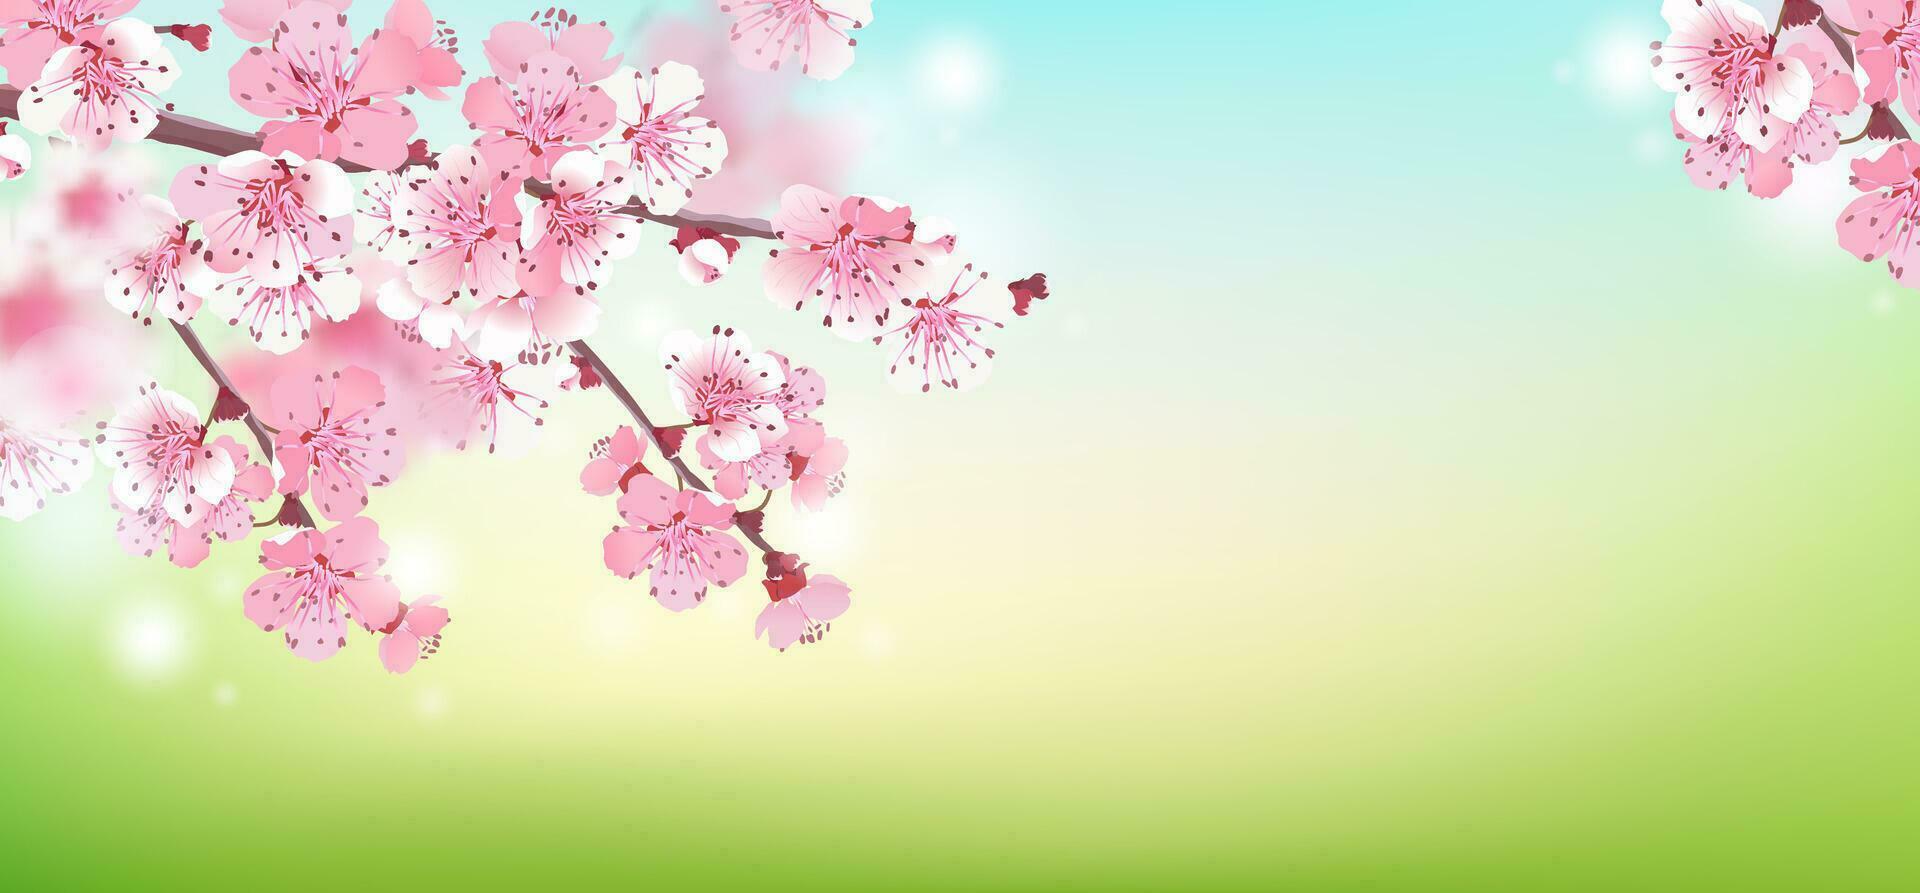 Soft focus. Sakura blooms on a blurry background. Spring is coming. Cherry blossom branch. Romantic vector illustration. Background for wedding invitations.